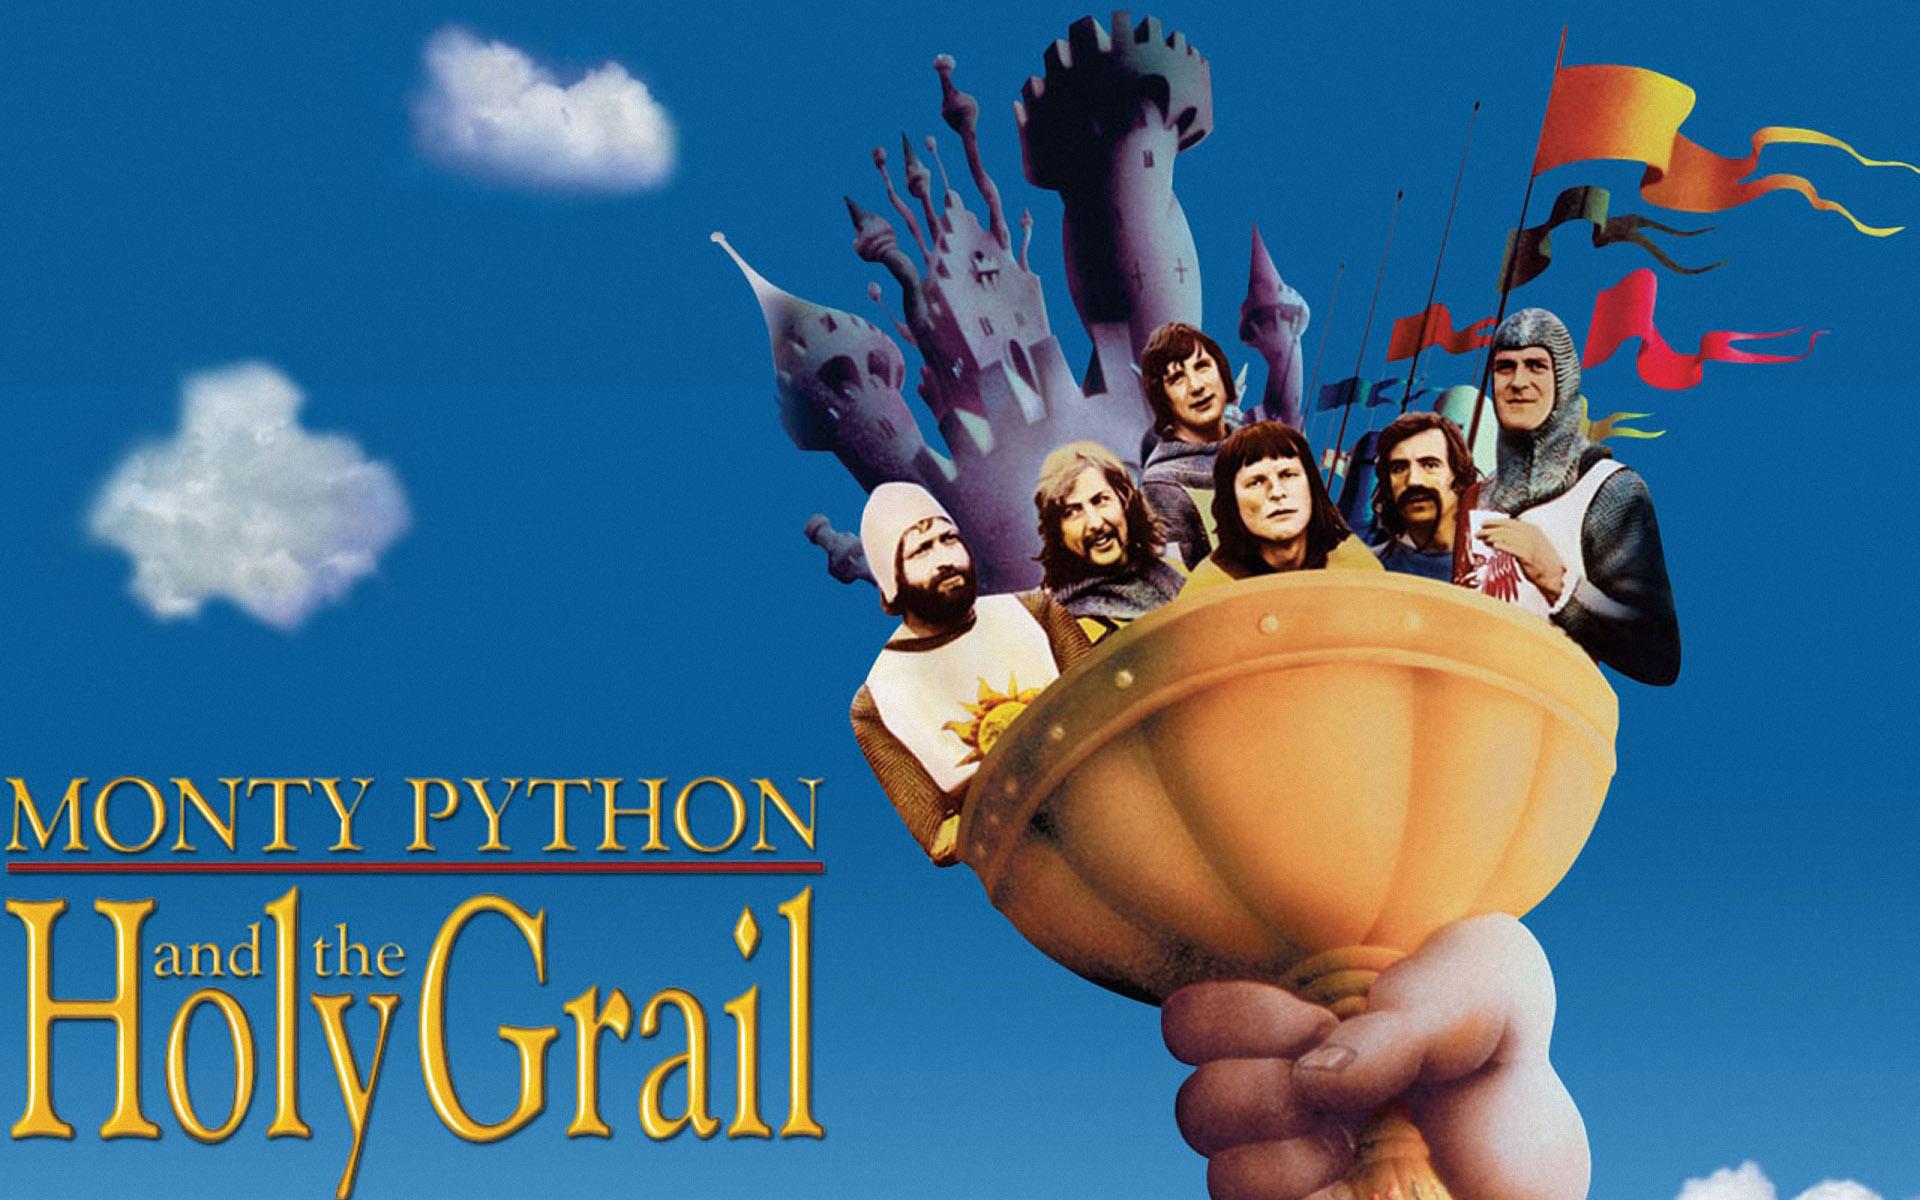 Monty Python 1920x1200 Wallpapers, 1920x1200 Wallpapers & Pictures ...